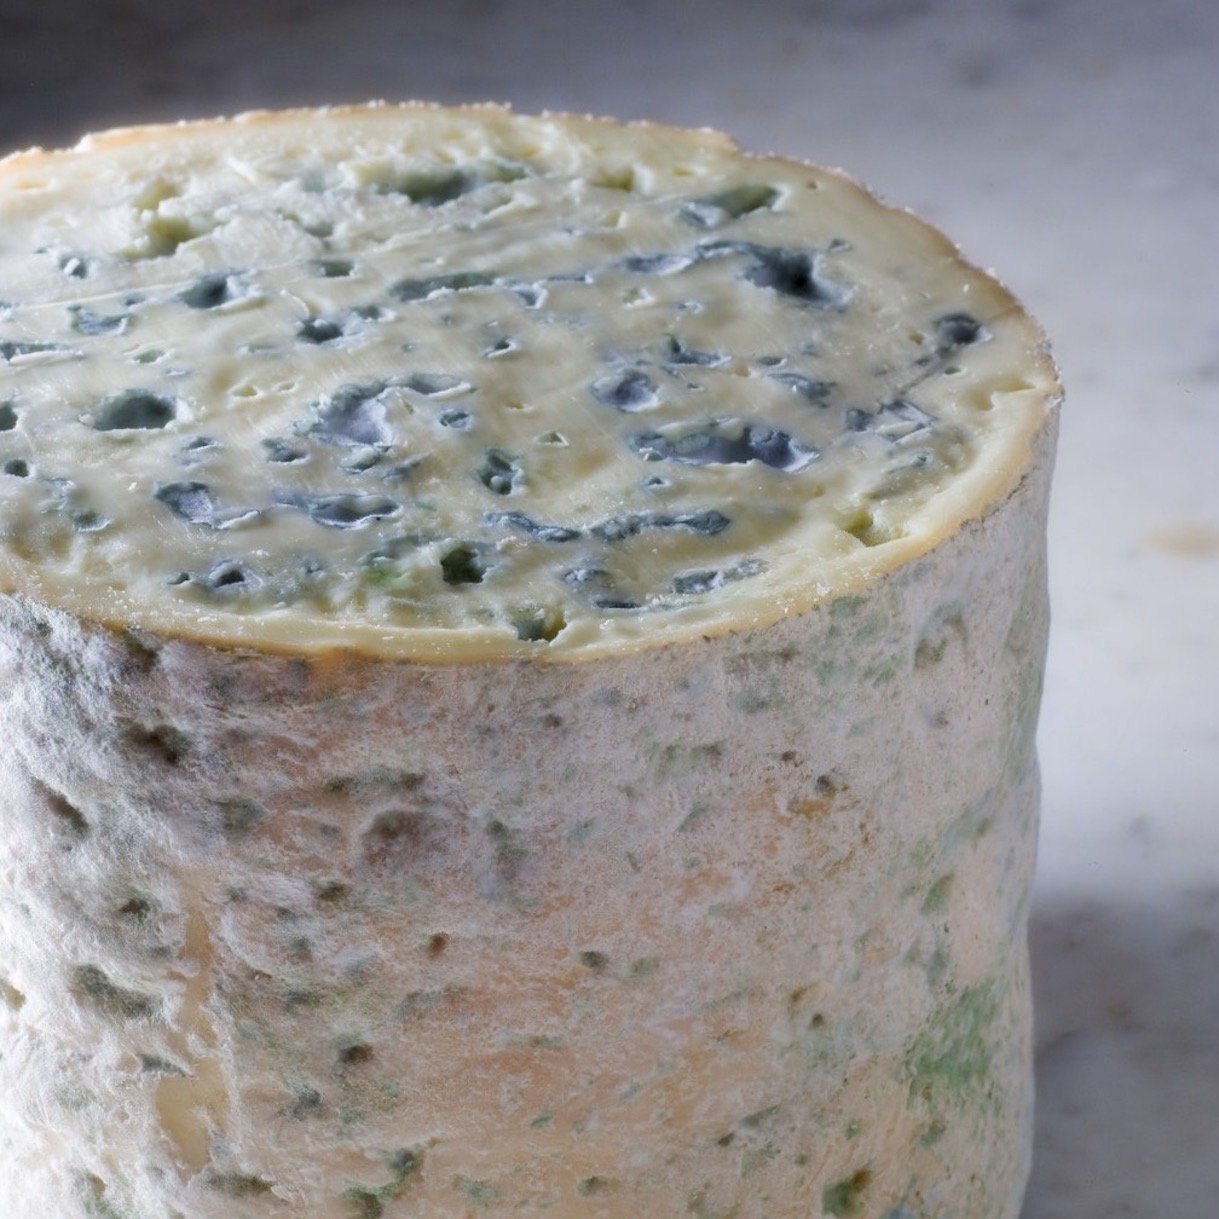 Shop Fourme d'Ambert Cheese in Singapore - The New Grocer